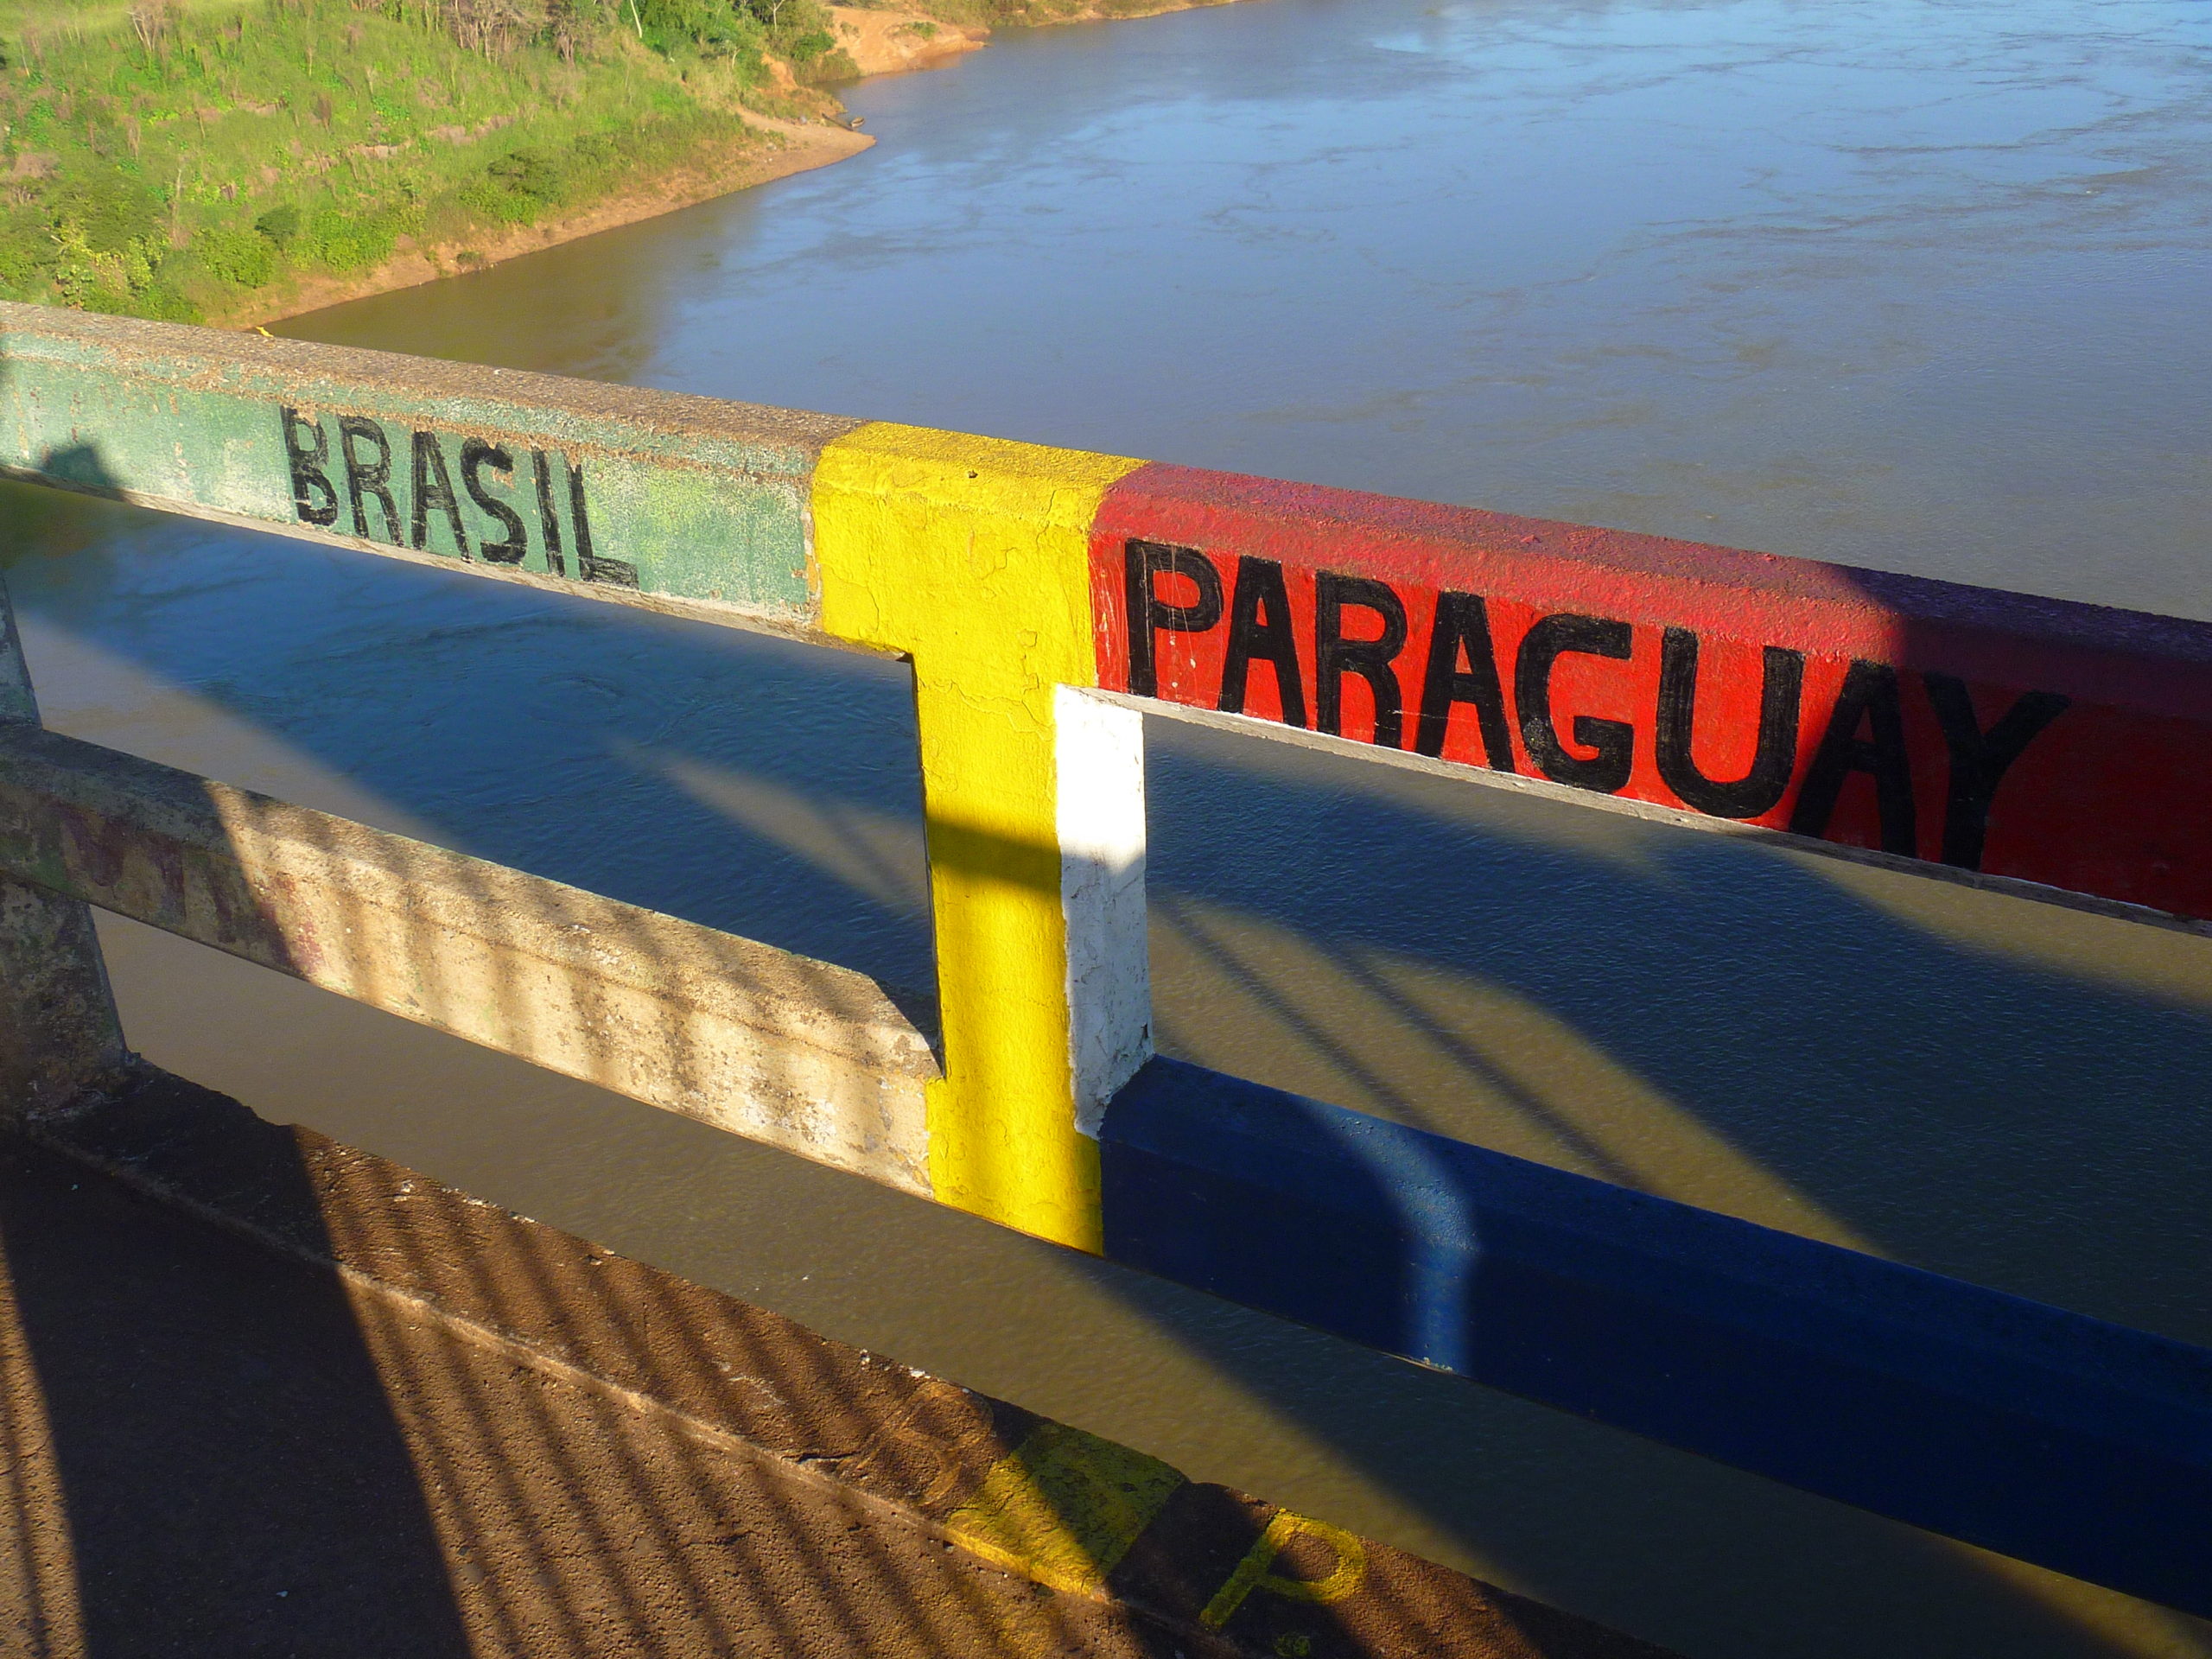 President Jair Bolsonaro announced on Thursday, October 15th, the reopening of Brazil's land borders with Paraguay, closed until now as a result of the coronavirus pandemic.